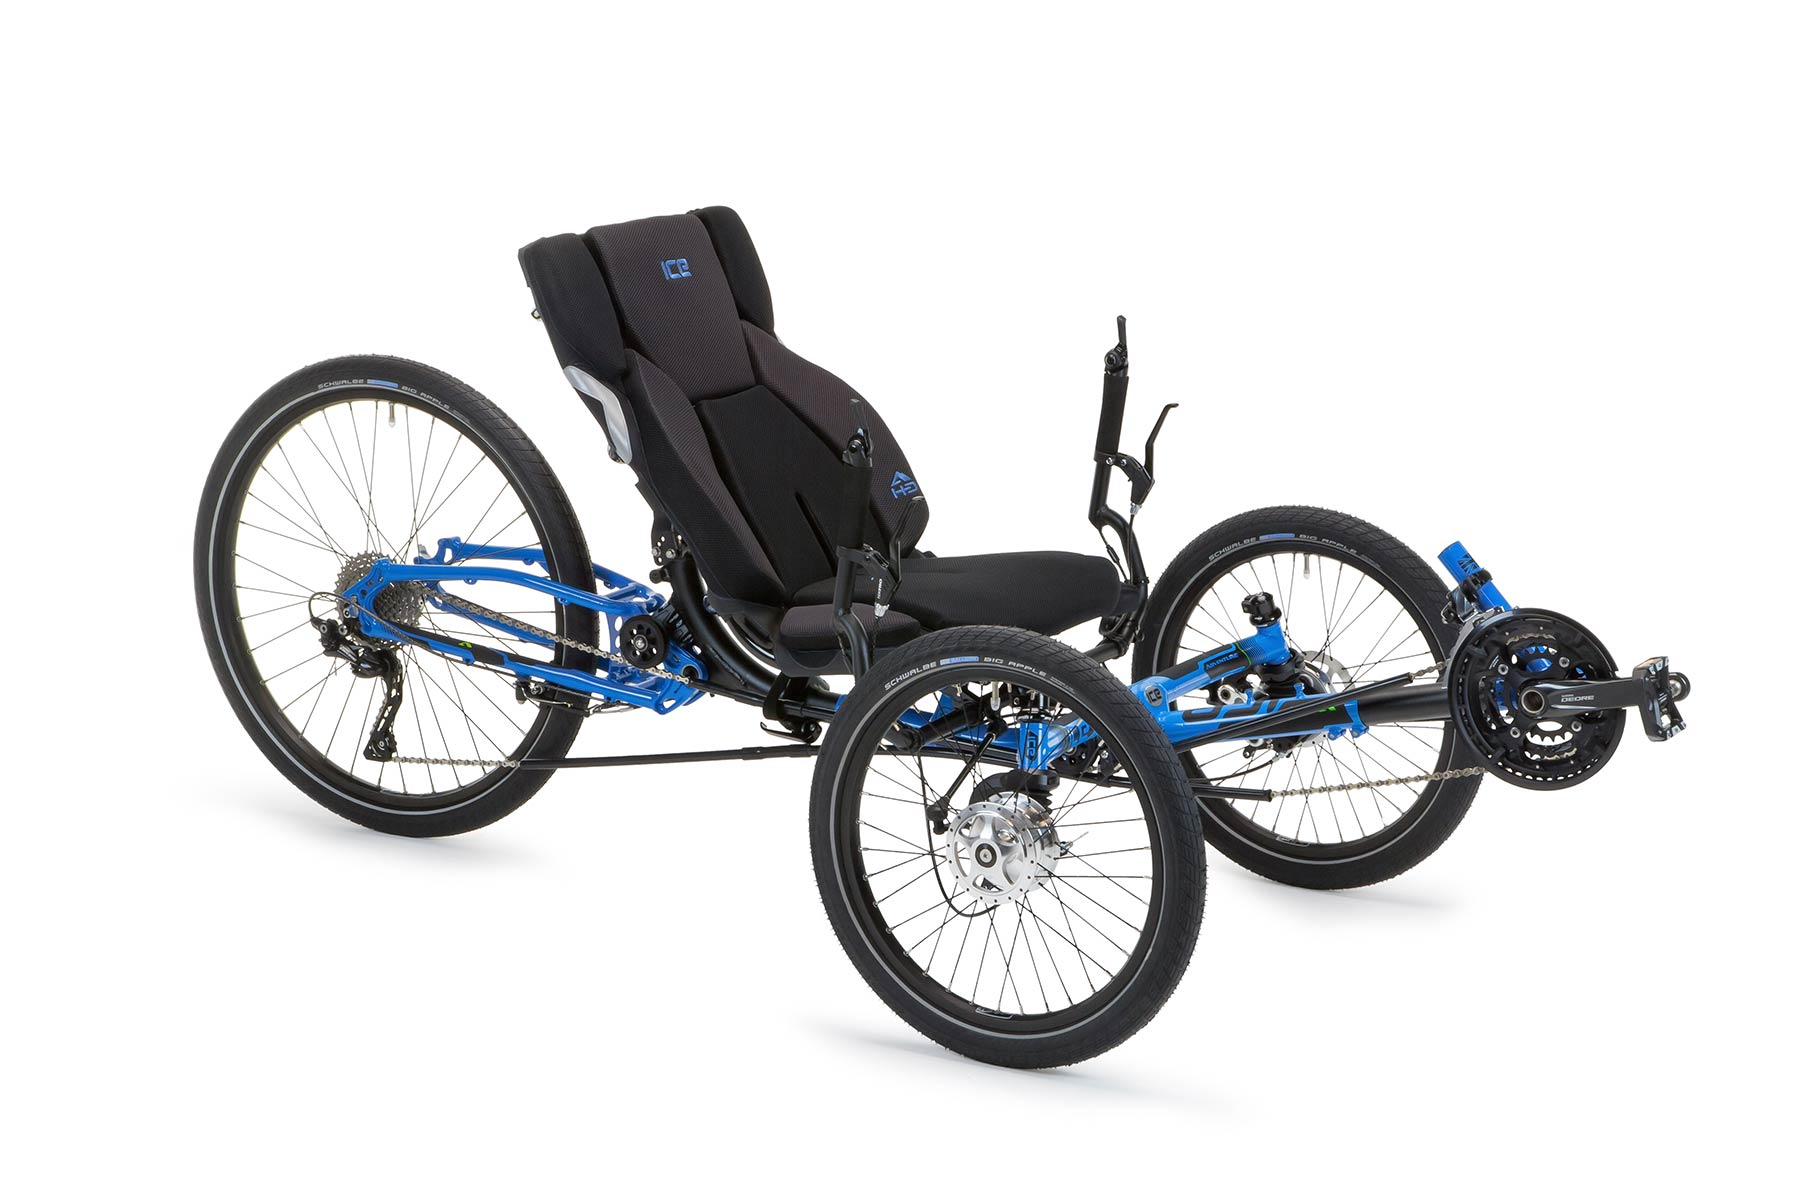 ICE Adventure HD is a great recumbent trike for overweight people